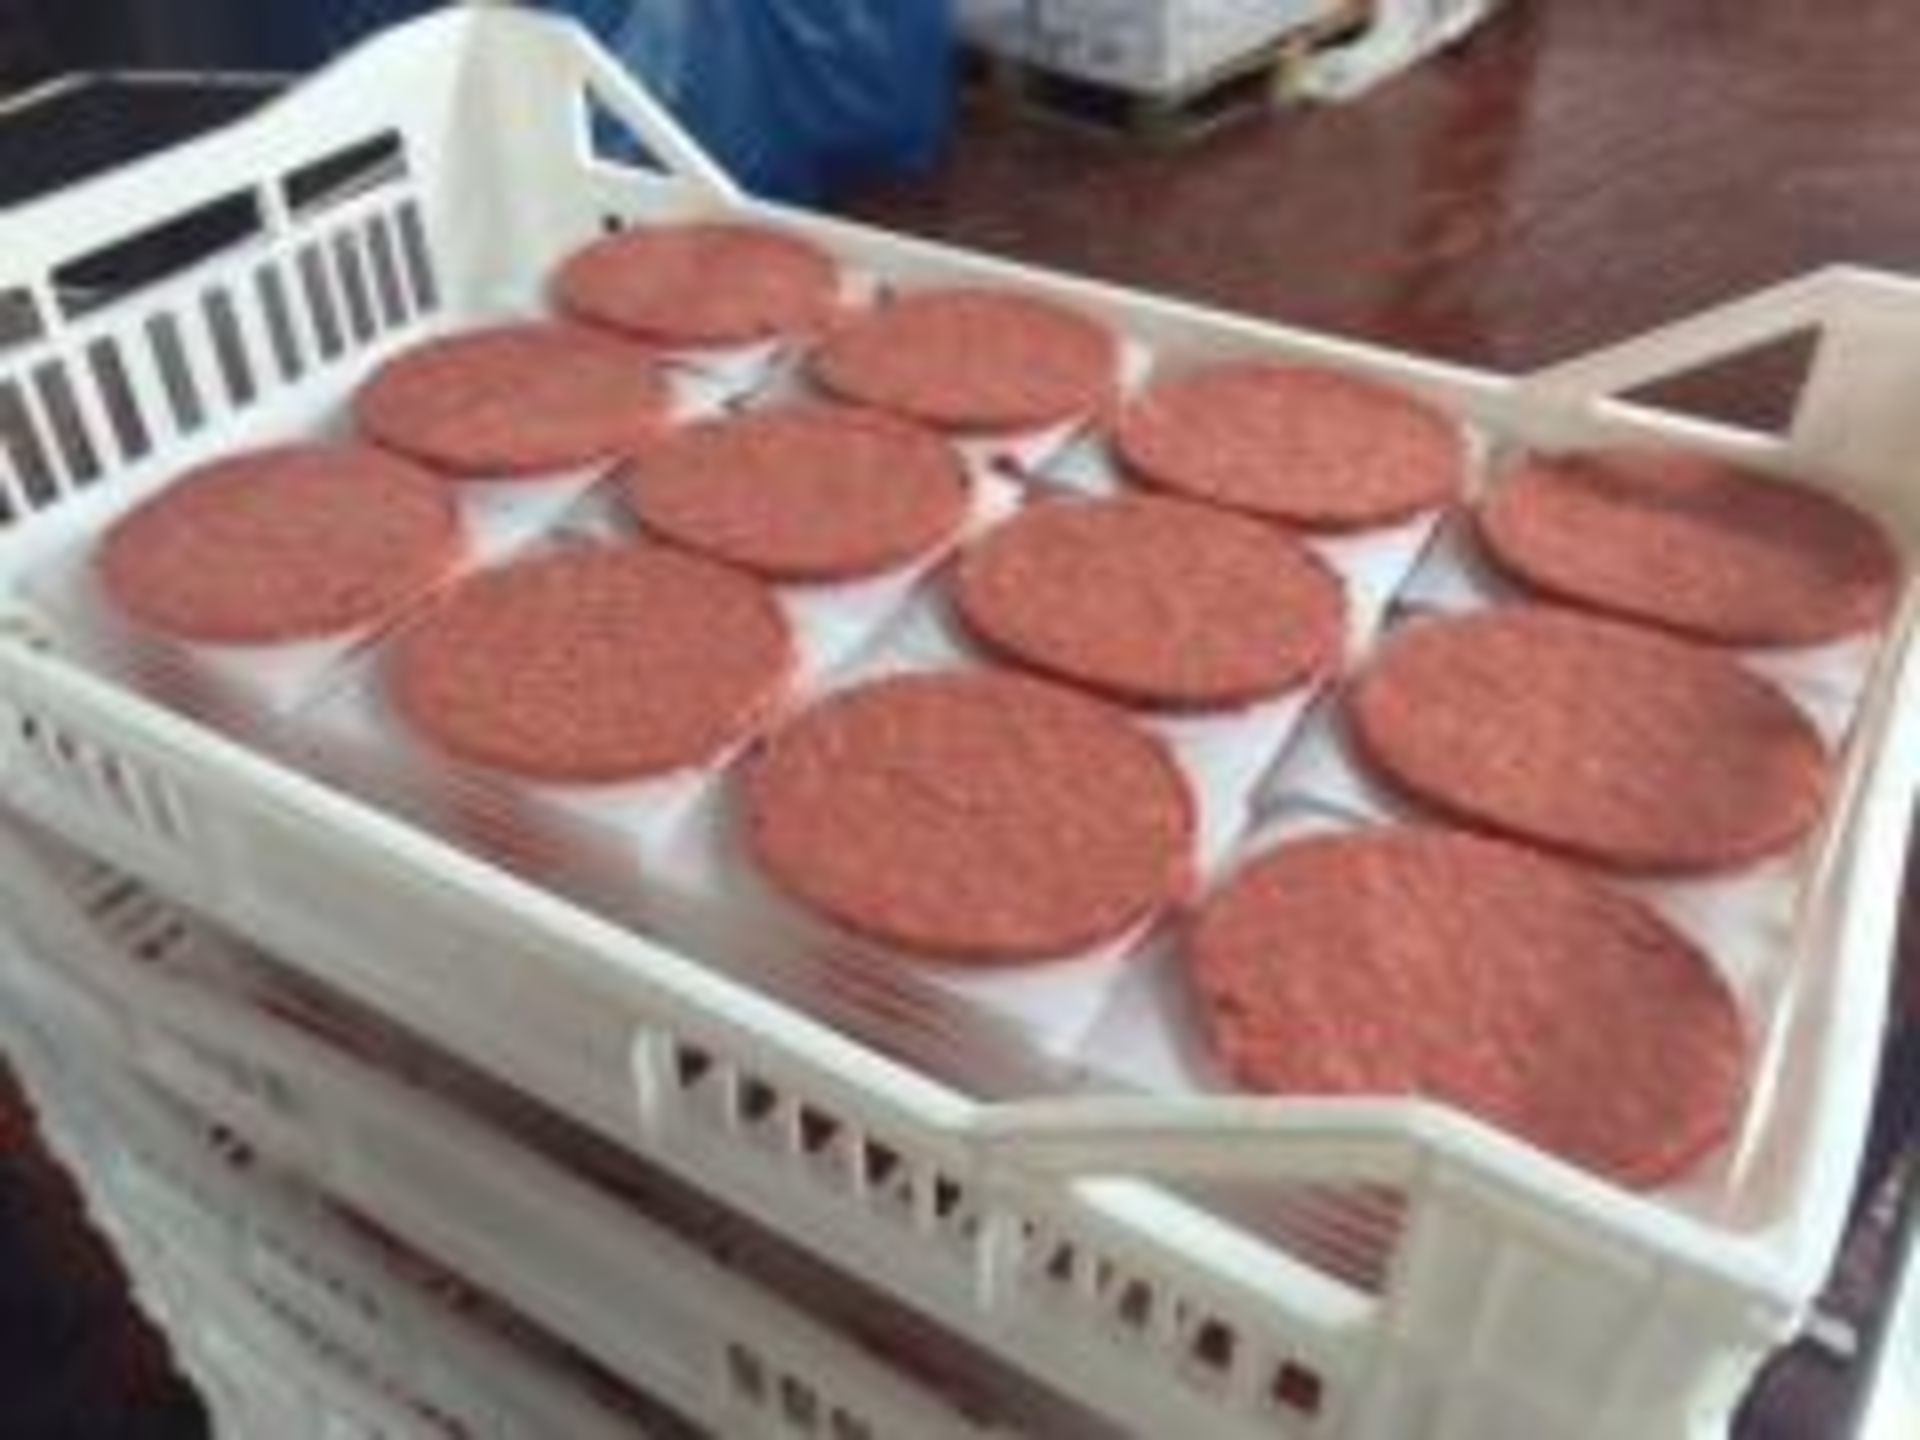 Formax F6 burger former, fitted with paper interleave, doing 4 ounce and 6 ounce burgers - Image 3 of 5